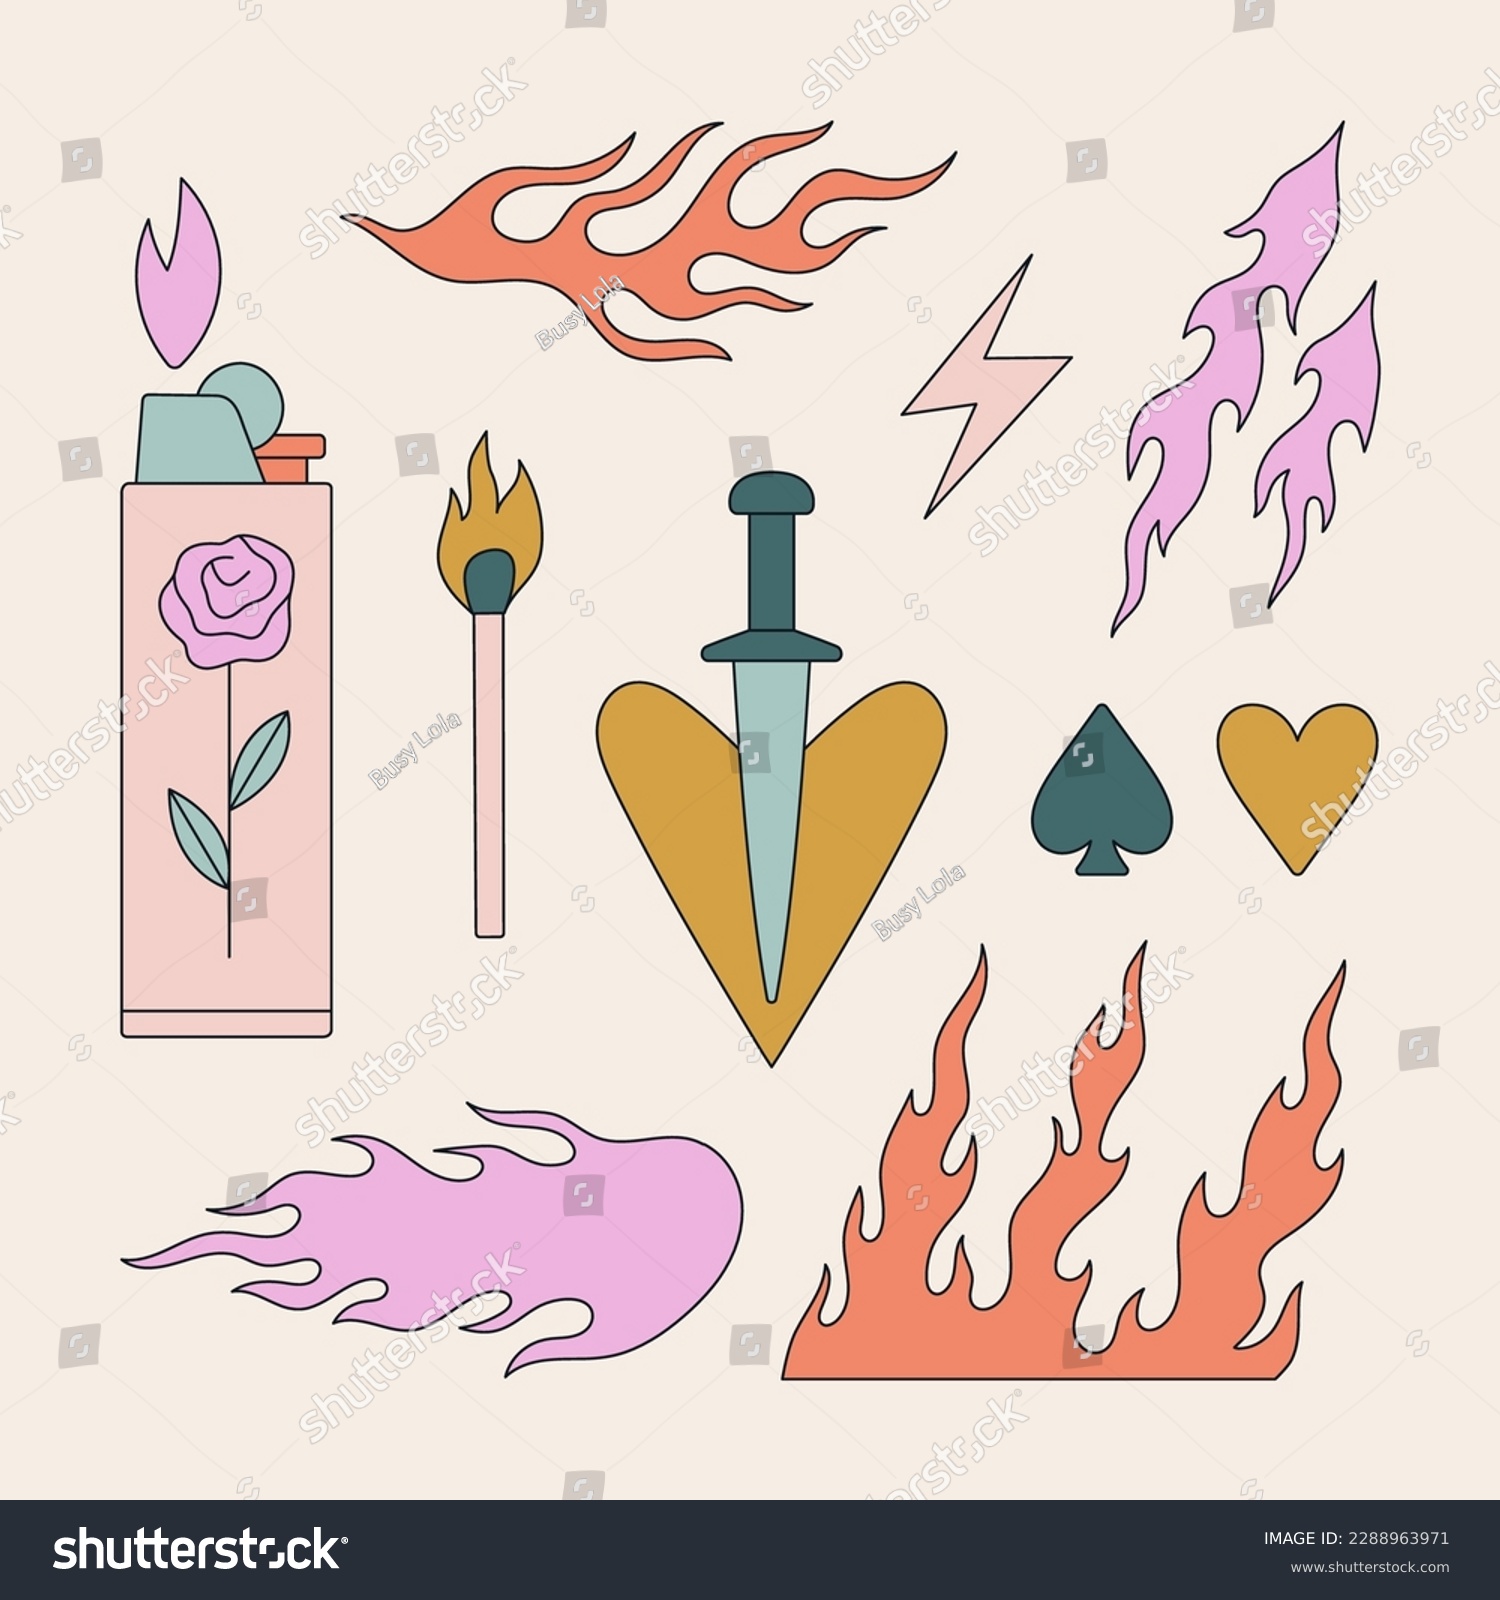 SVG of Tattoos set with fire elements. Lighter, flame, heart, match, knife etc. Hand drawn vector illustrations isolated on colorful background. Black contour, hot design. svg